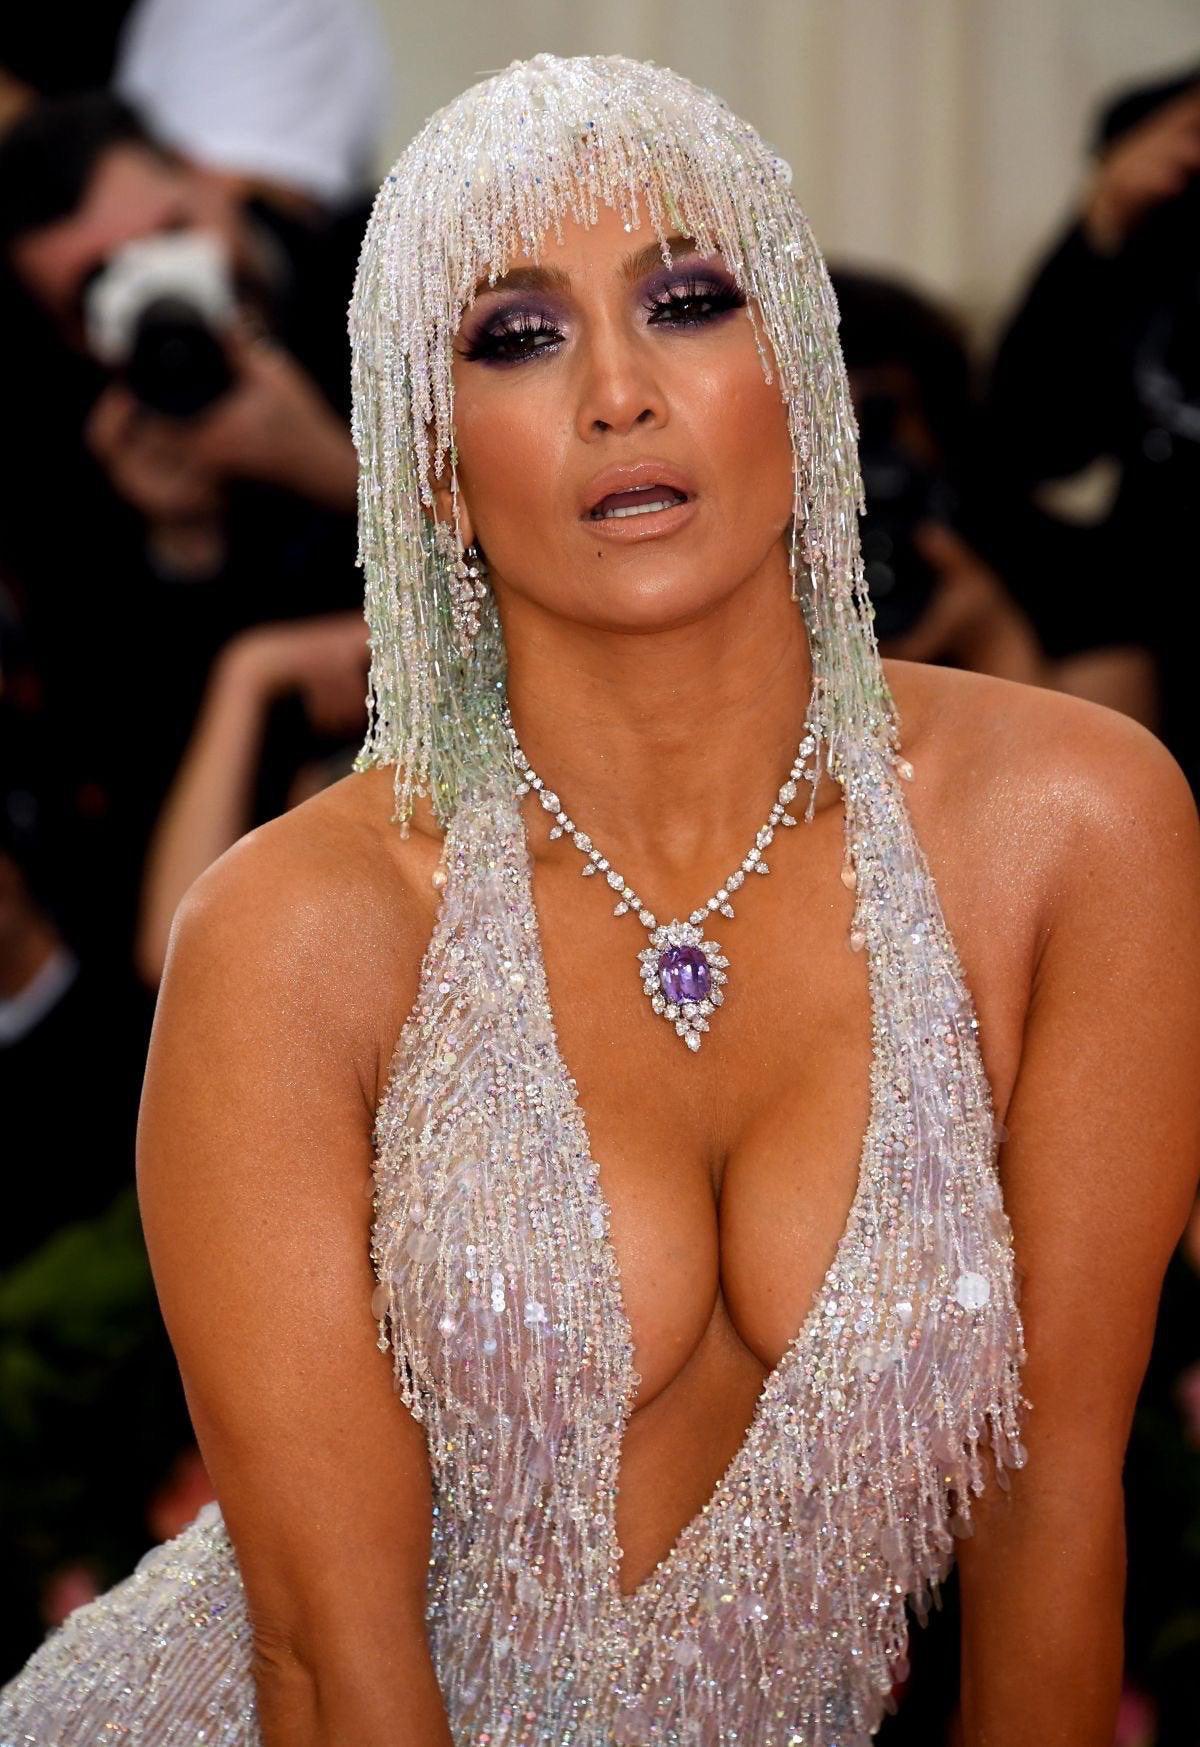 I bet Jennifer Lopez gave someone a titfuck while she was wearing this dress